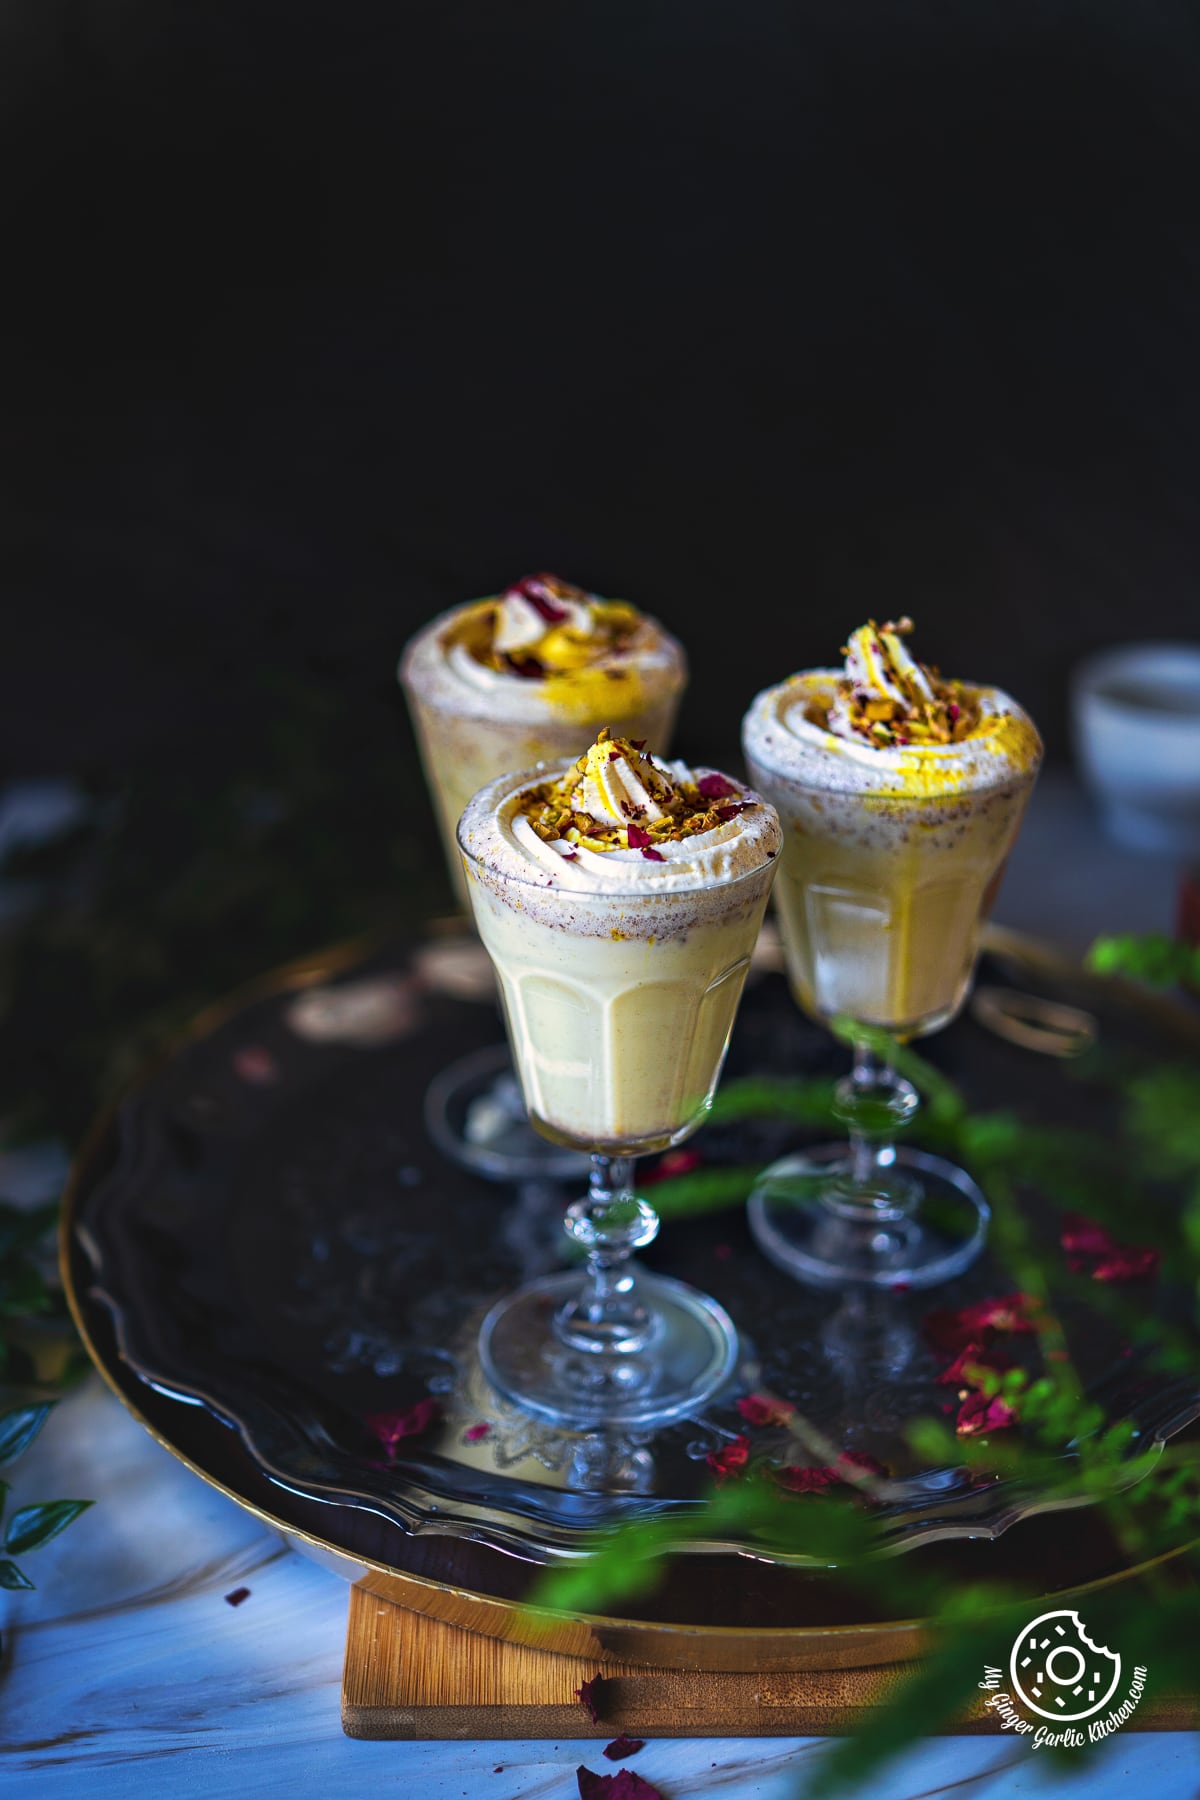 3 glasses of thandai frappe garnished with whipped cream and rose petals on a metal plate